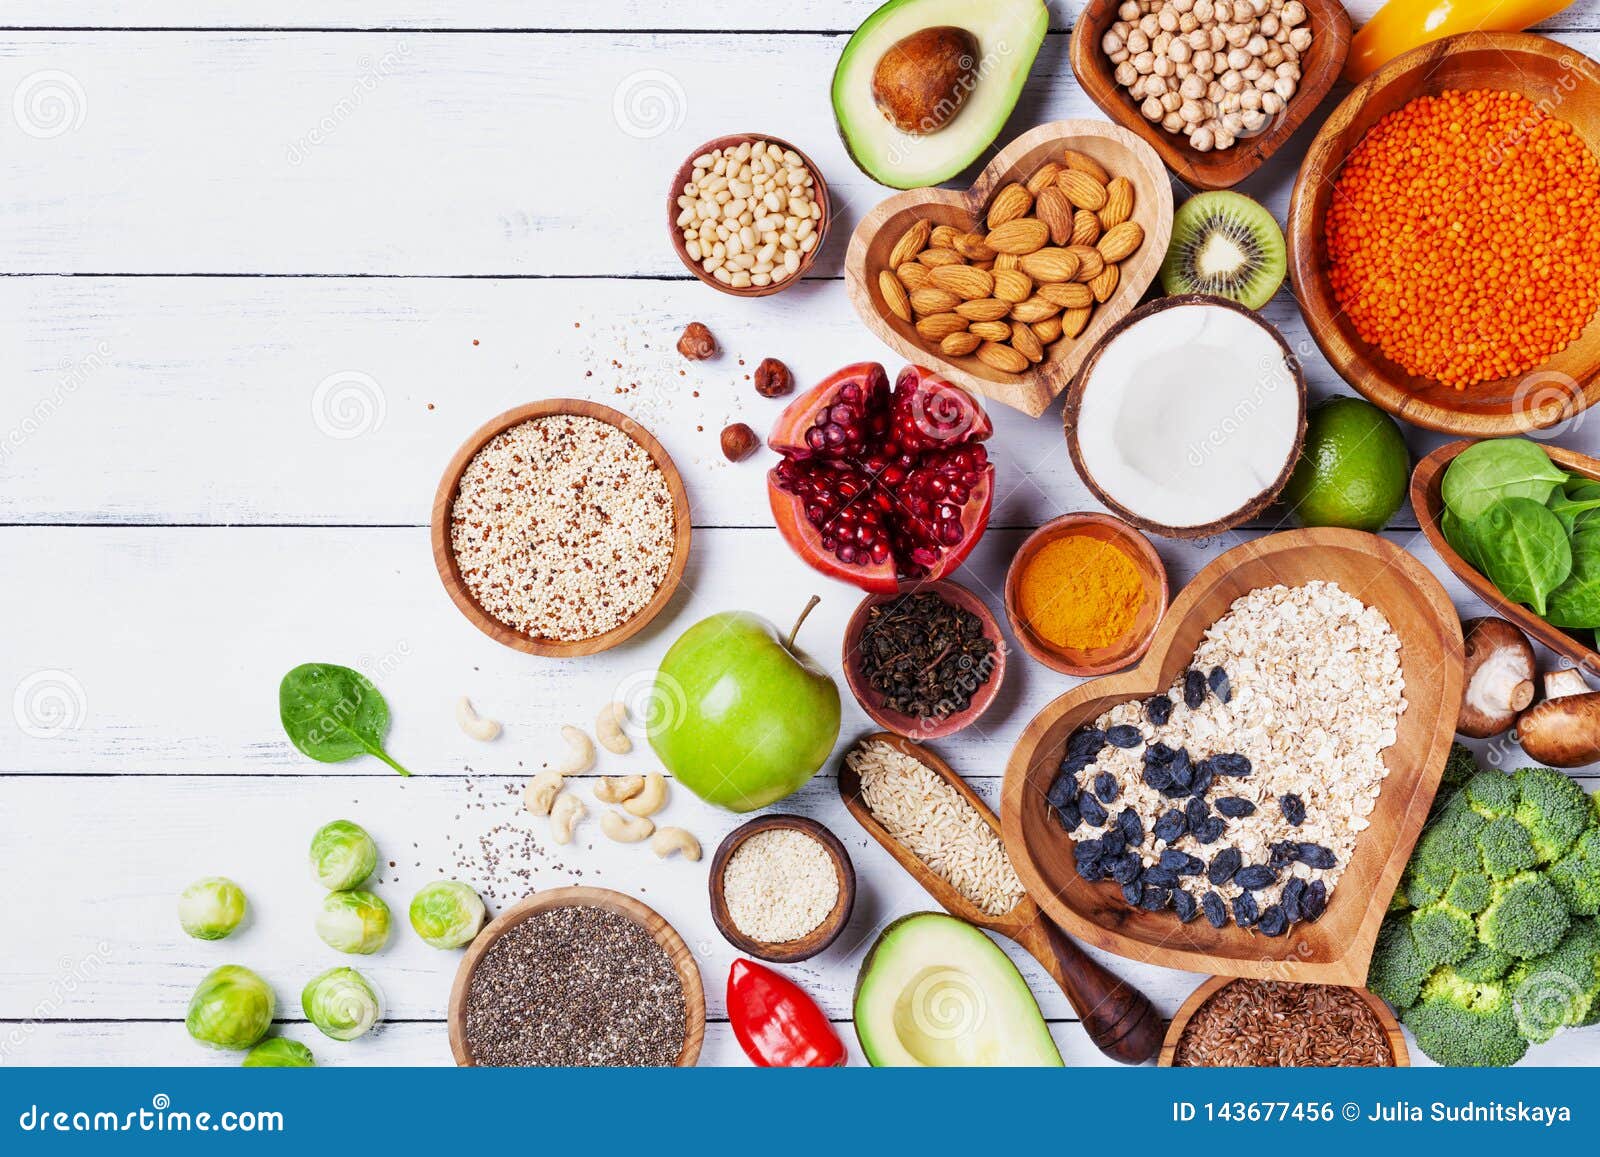 healthy food background from fruits, vegetables, cereal, nuts and superfood. dietary and balanced vegetarian eating products